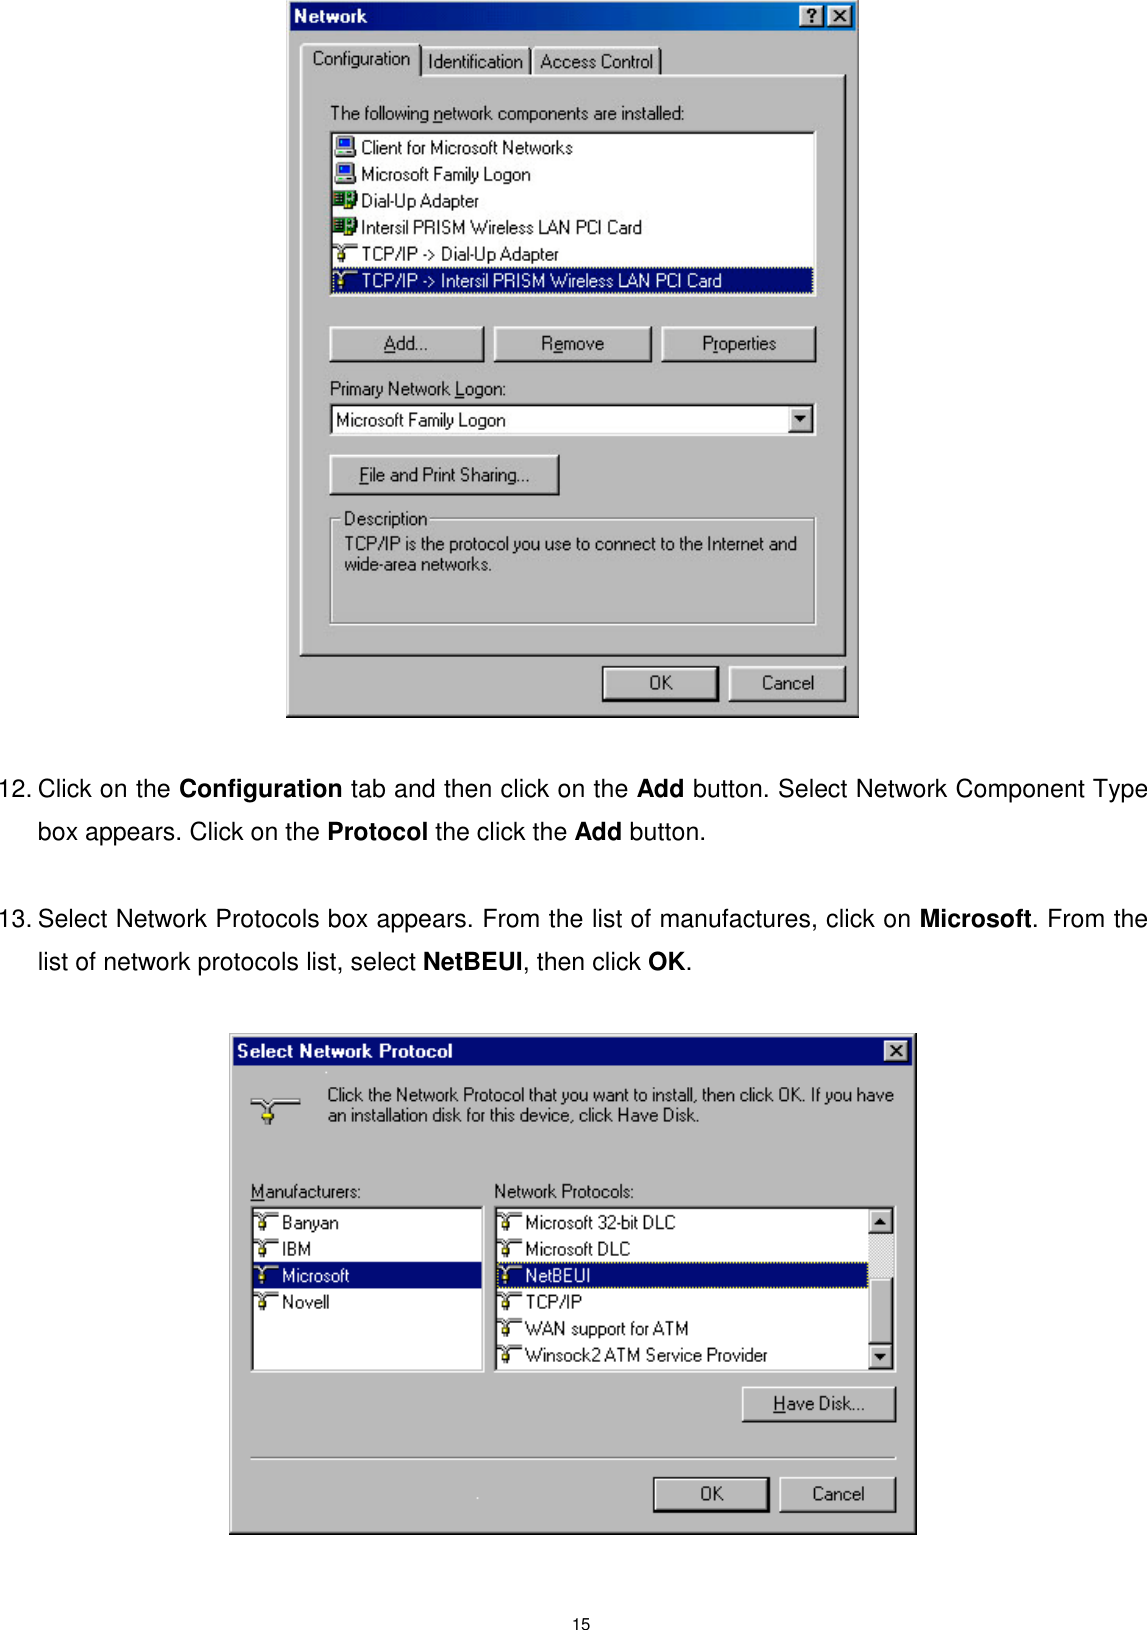 1512. Click on the Configuration tab and then click on the Add button. Select Network Component Typebox appears. Click on the Protocol the click the Add button.13. Select Network Protocols box appears. From the list of manufactures, click on Microsoft. From thelist of network protocols list, select NetBEUI, then click OK.